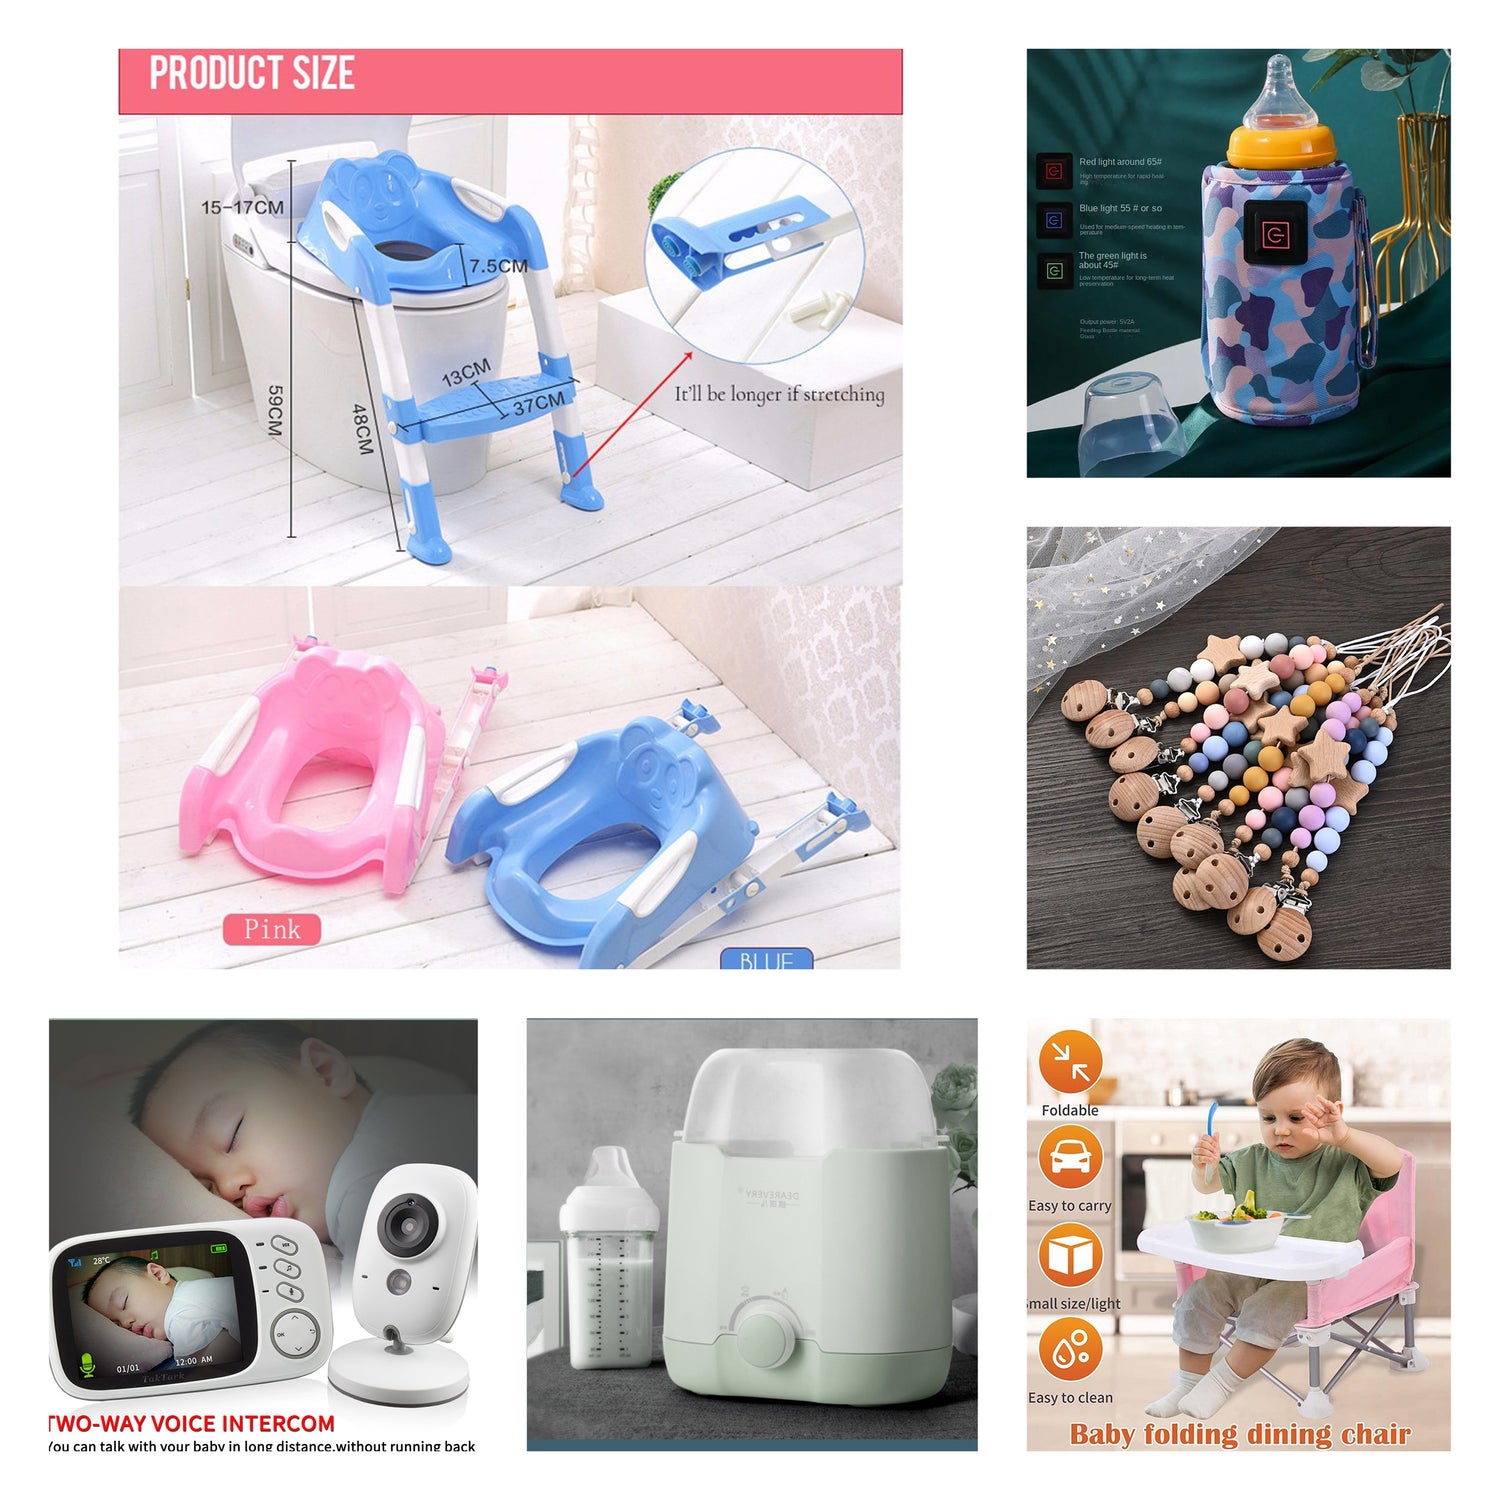 Baby Accessories: Potty Training Items, Toys, Stuffies and More! Newborn, Toddler, and Older